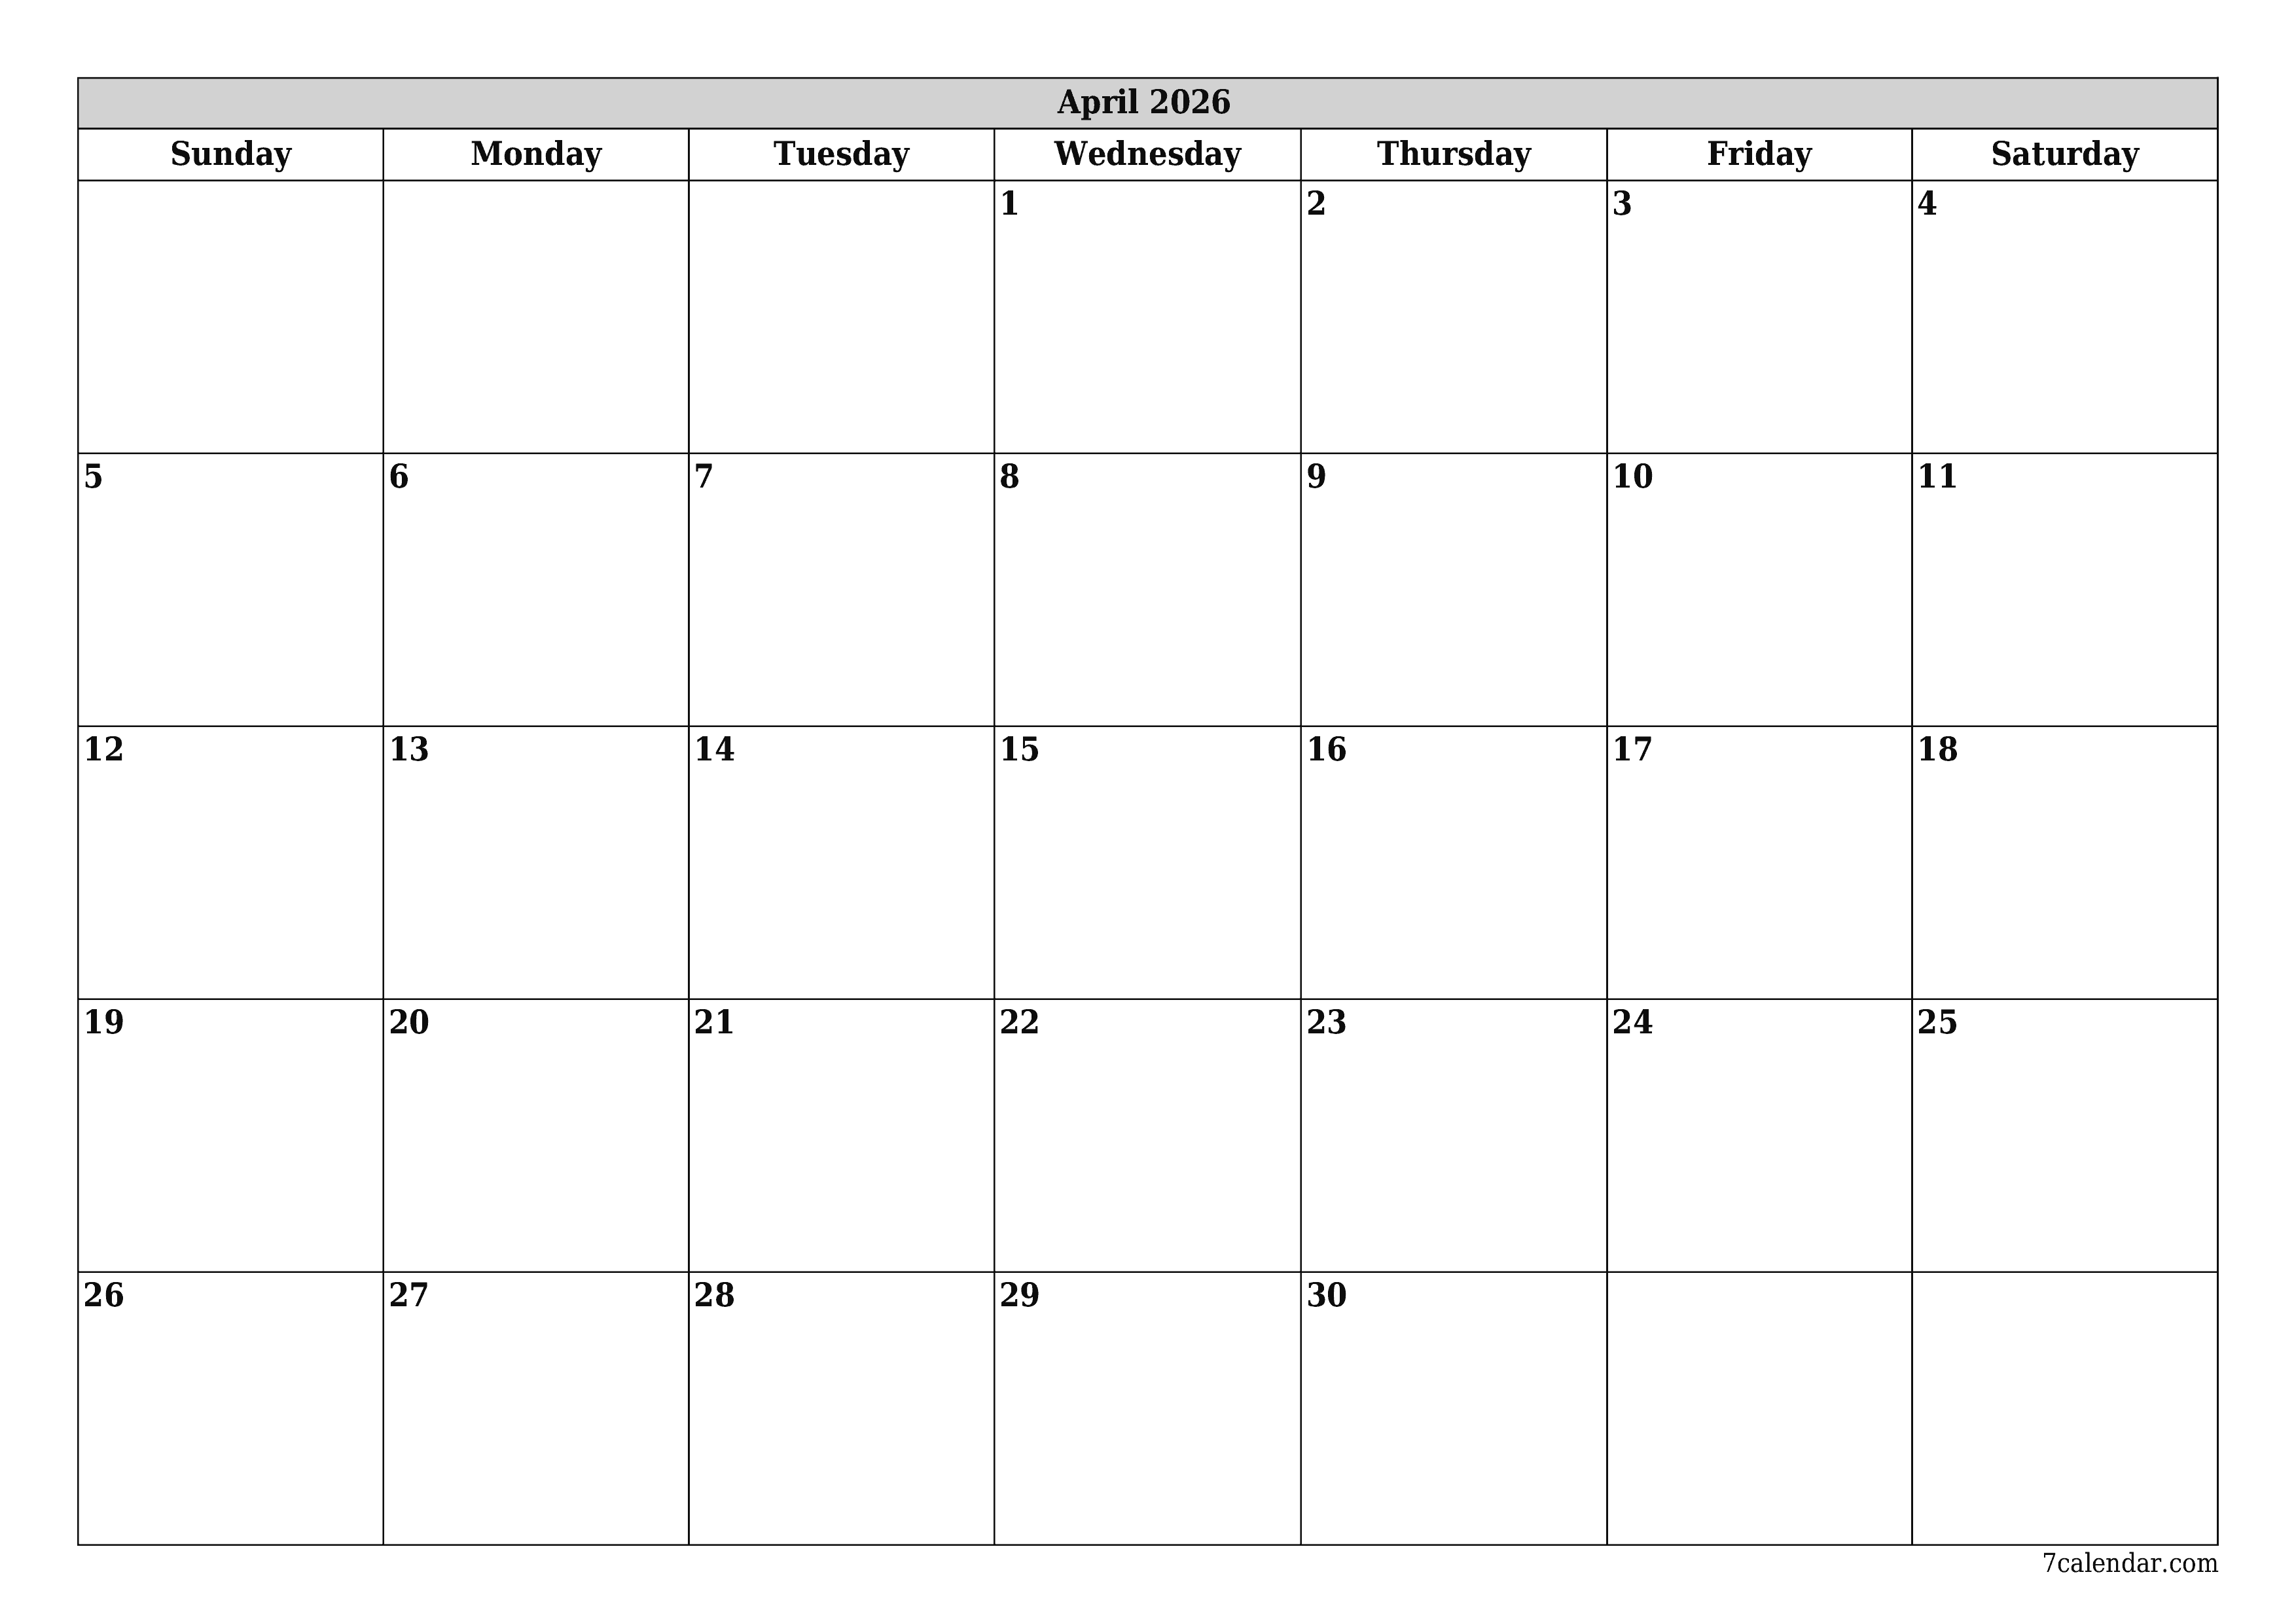 printable wall template free horizontal Monthly planner calendar April (Apr) 2026